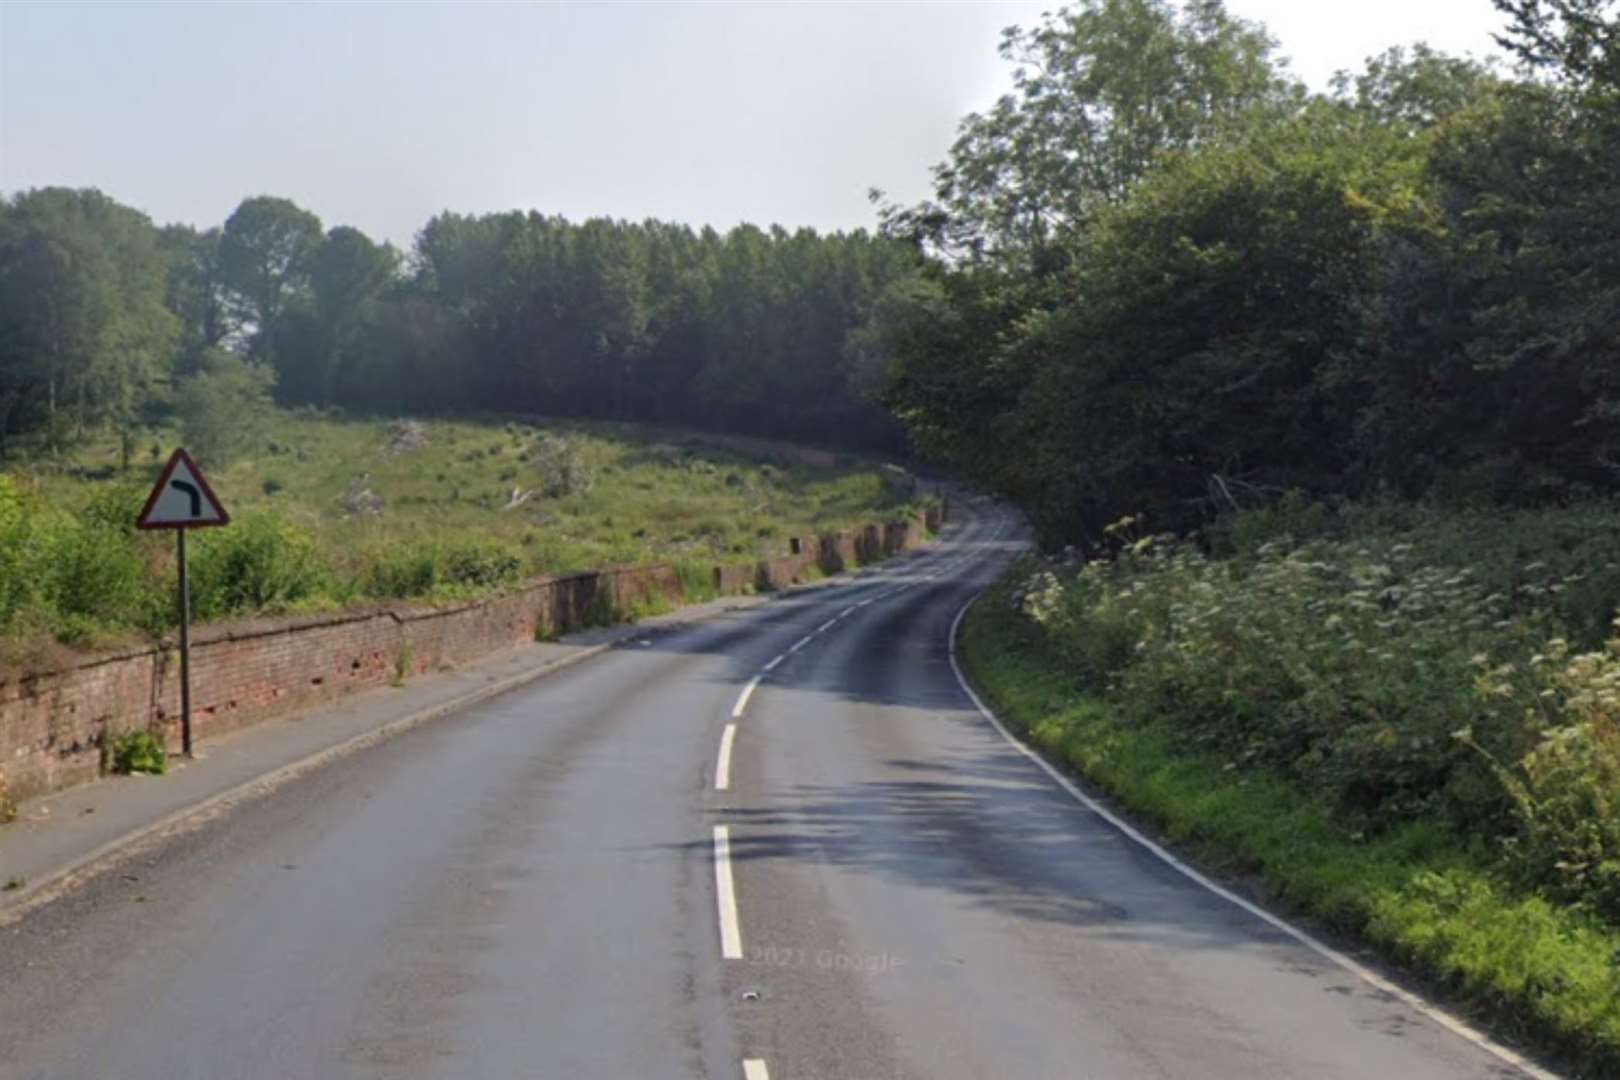 The chase started on the A251 Faversham Road. Photo: Google Street View